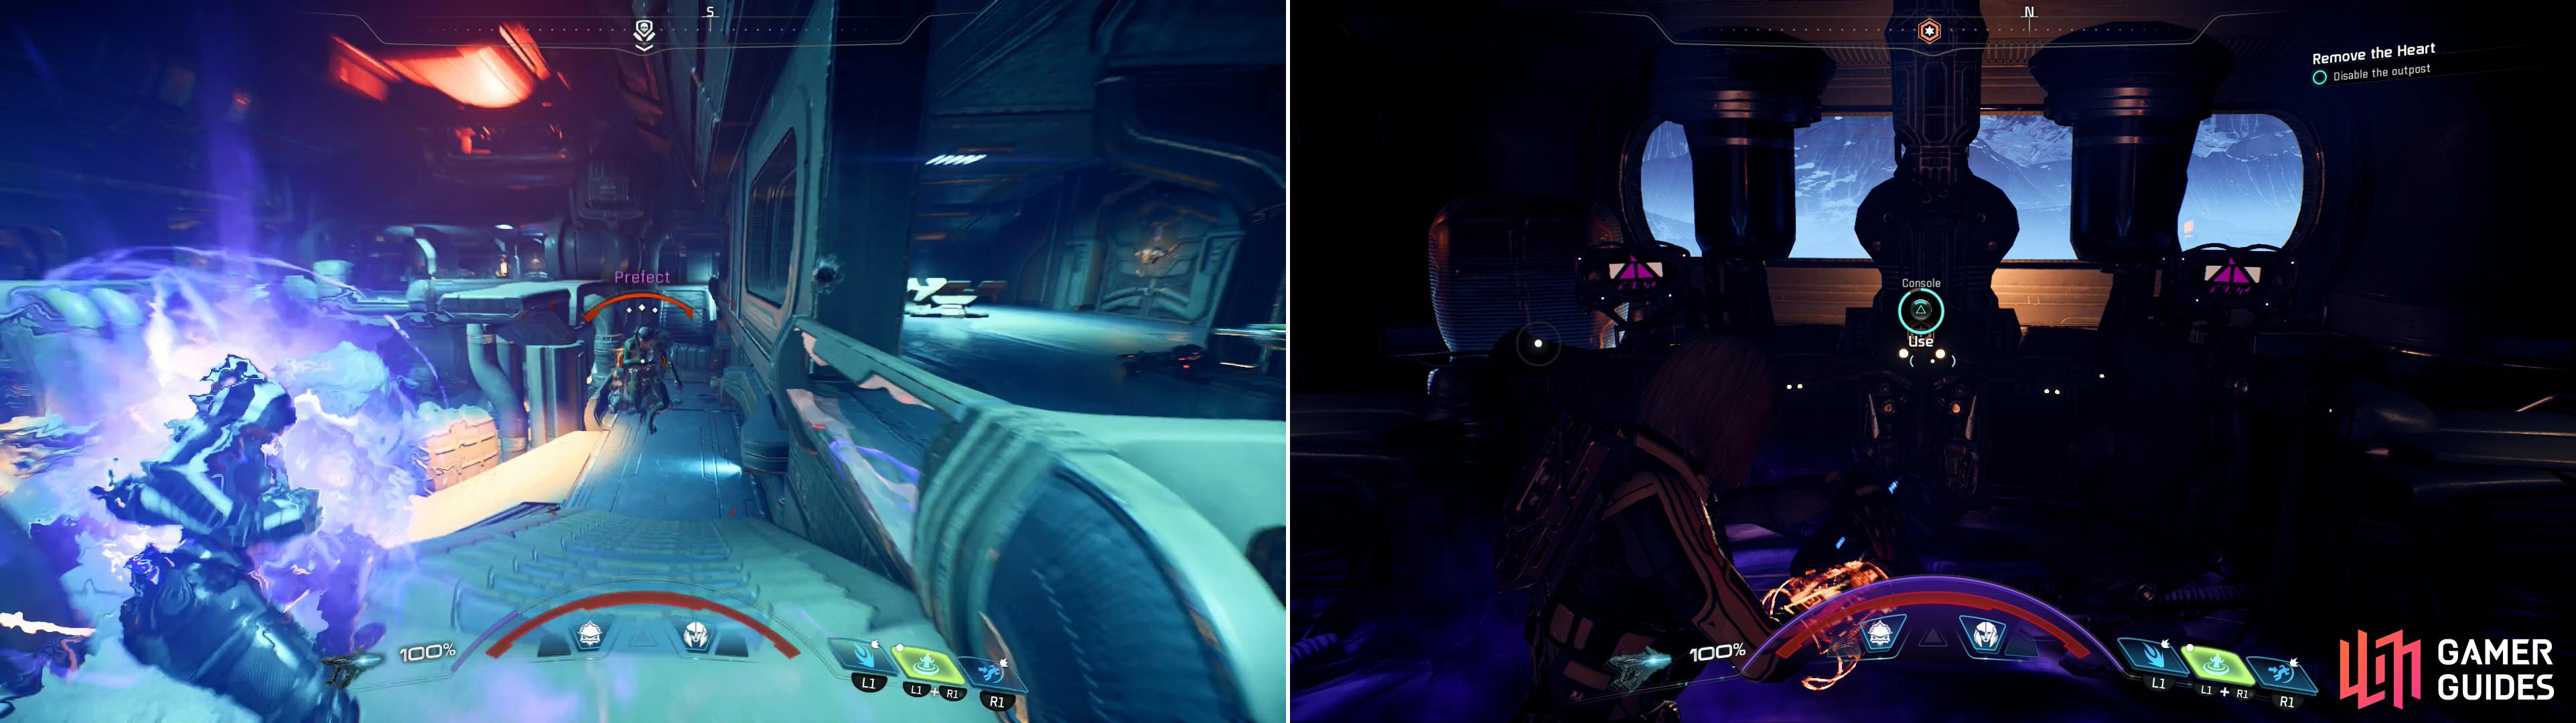 After destroying the Hangar Platforms, the base's commanding officer - the Prefect - will show himself (left). Defeat the Prefect and ride an elevator to the base's command center, where you can finally disable the outpost entirely (right).